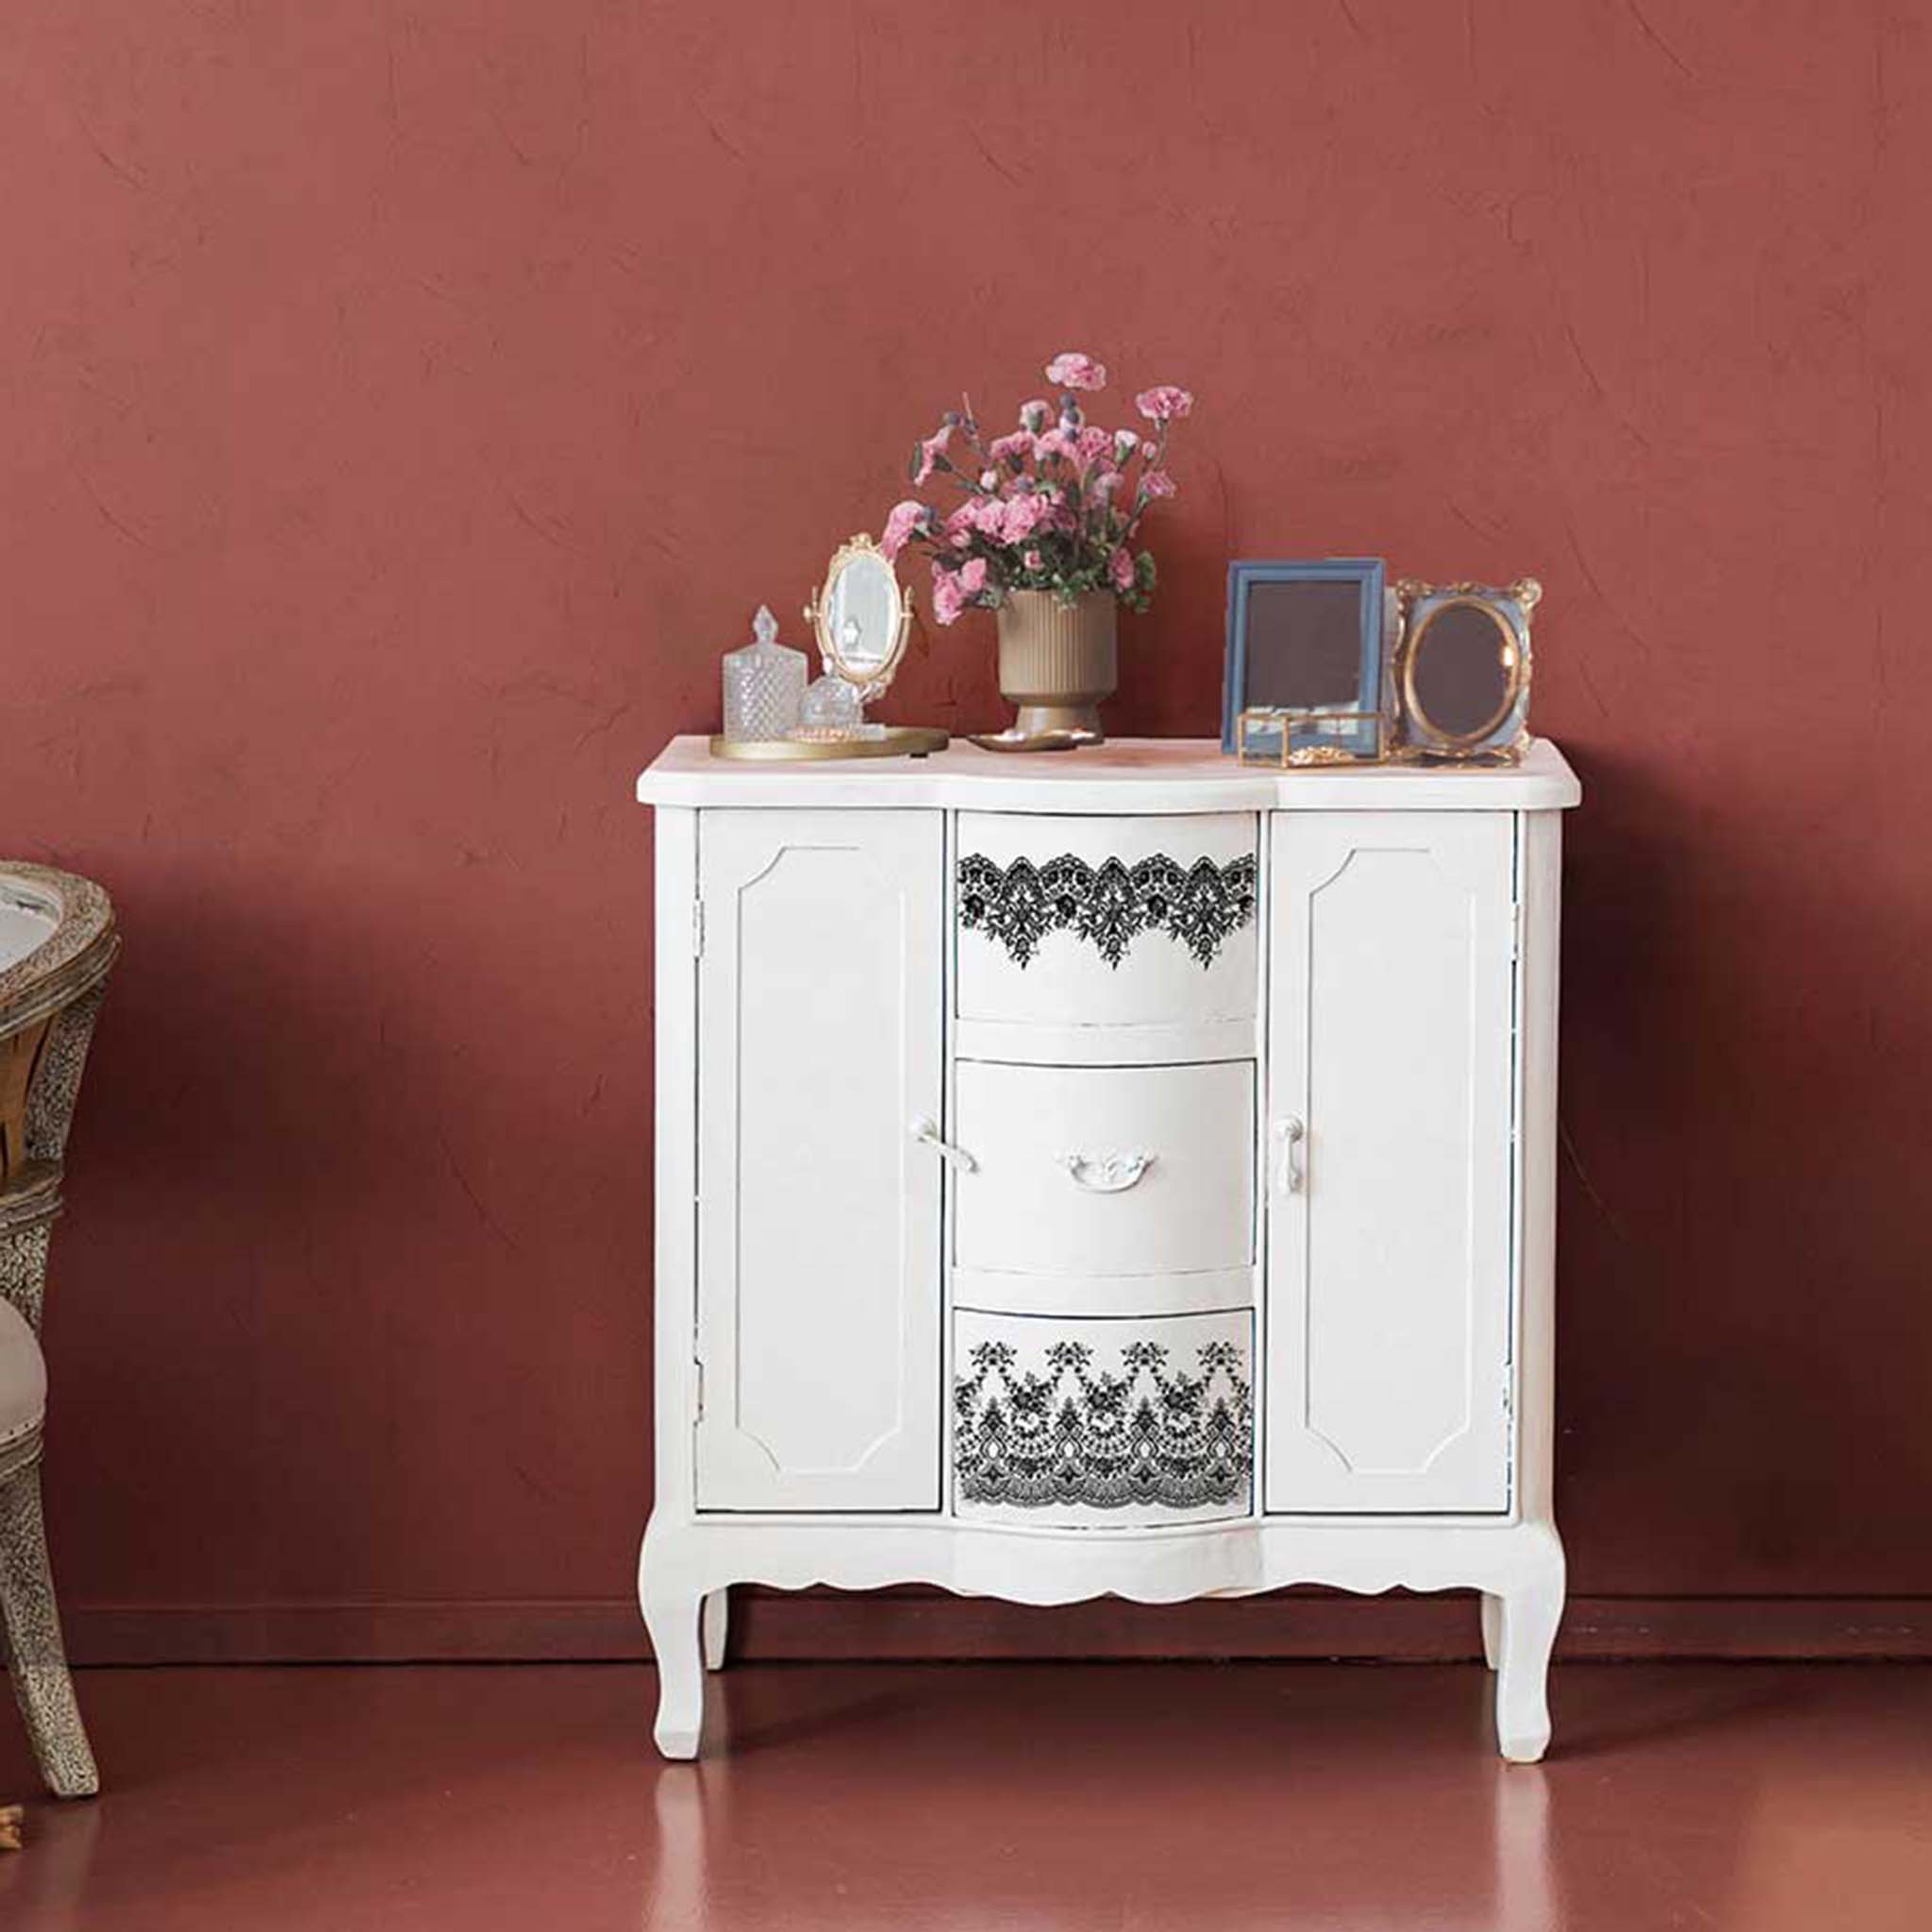 A tall white vintage cabinet with black lace design across the 2 drawers. Vintage vanity set, frames and vase are displayed on top.